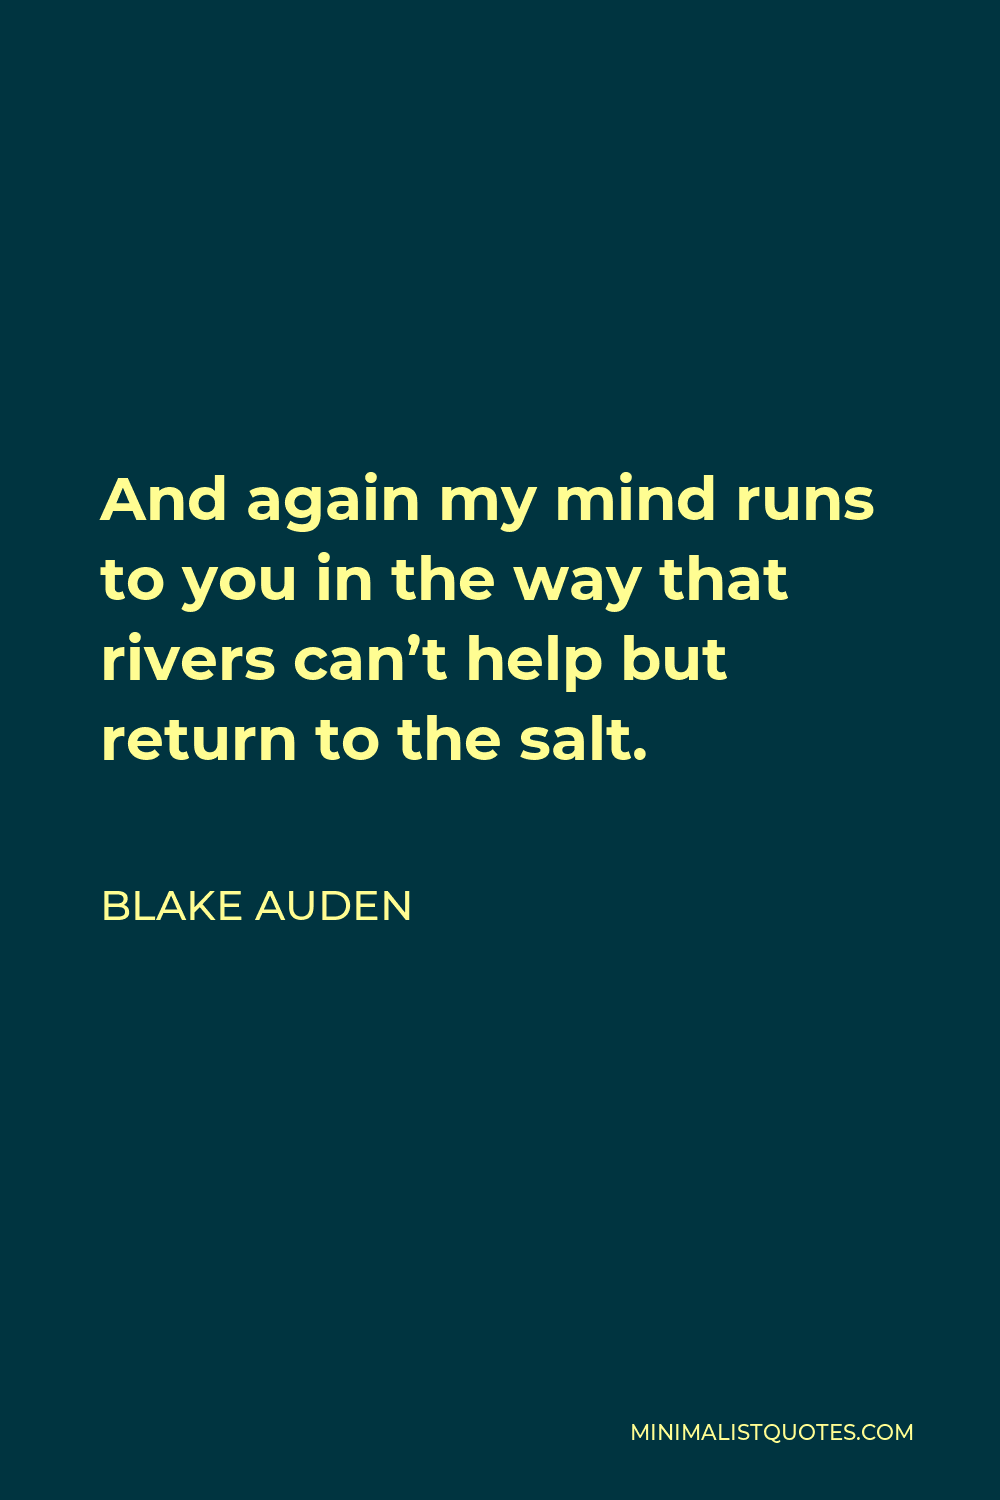 Blake Auden Quote - And again my mind runs to you in the way that rivers can’t help but return to the salt.